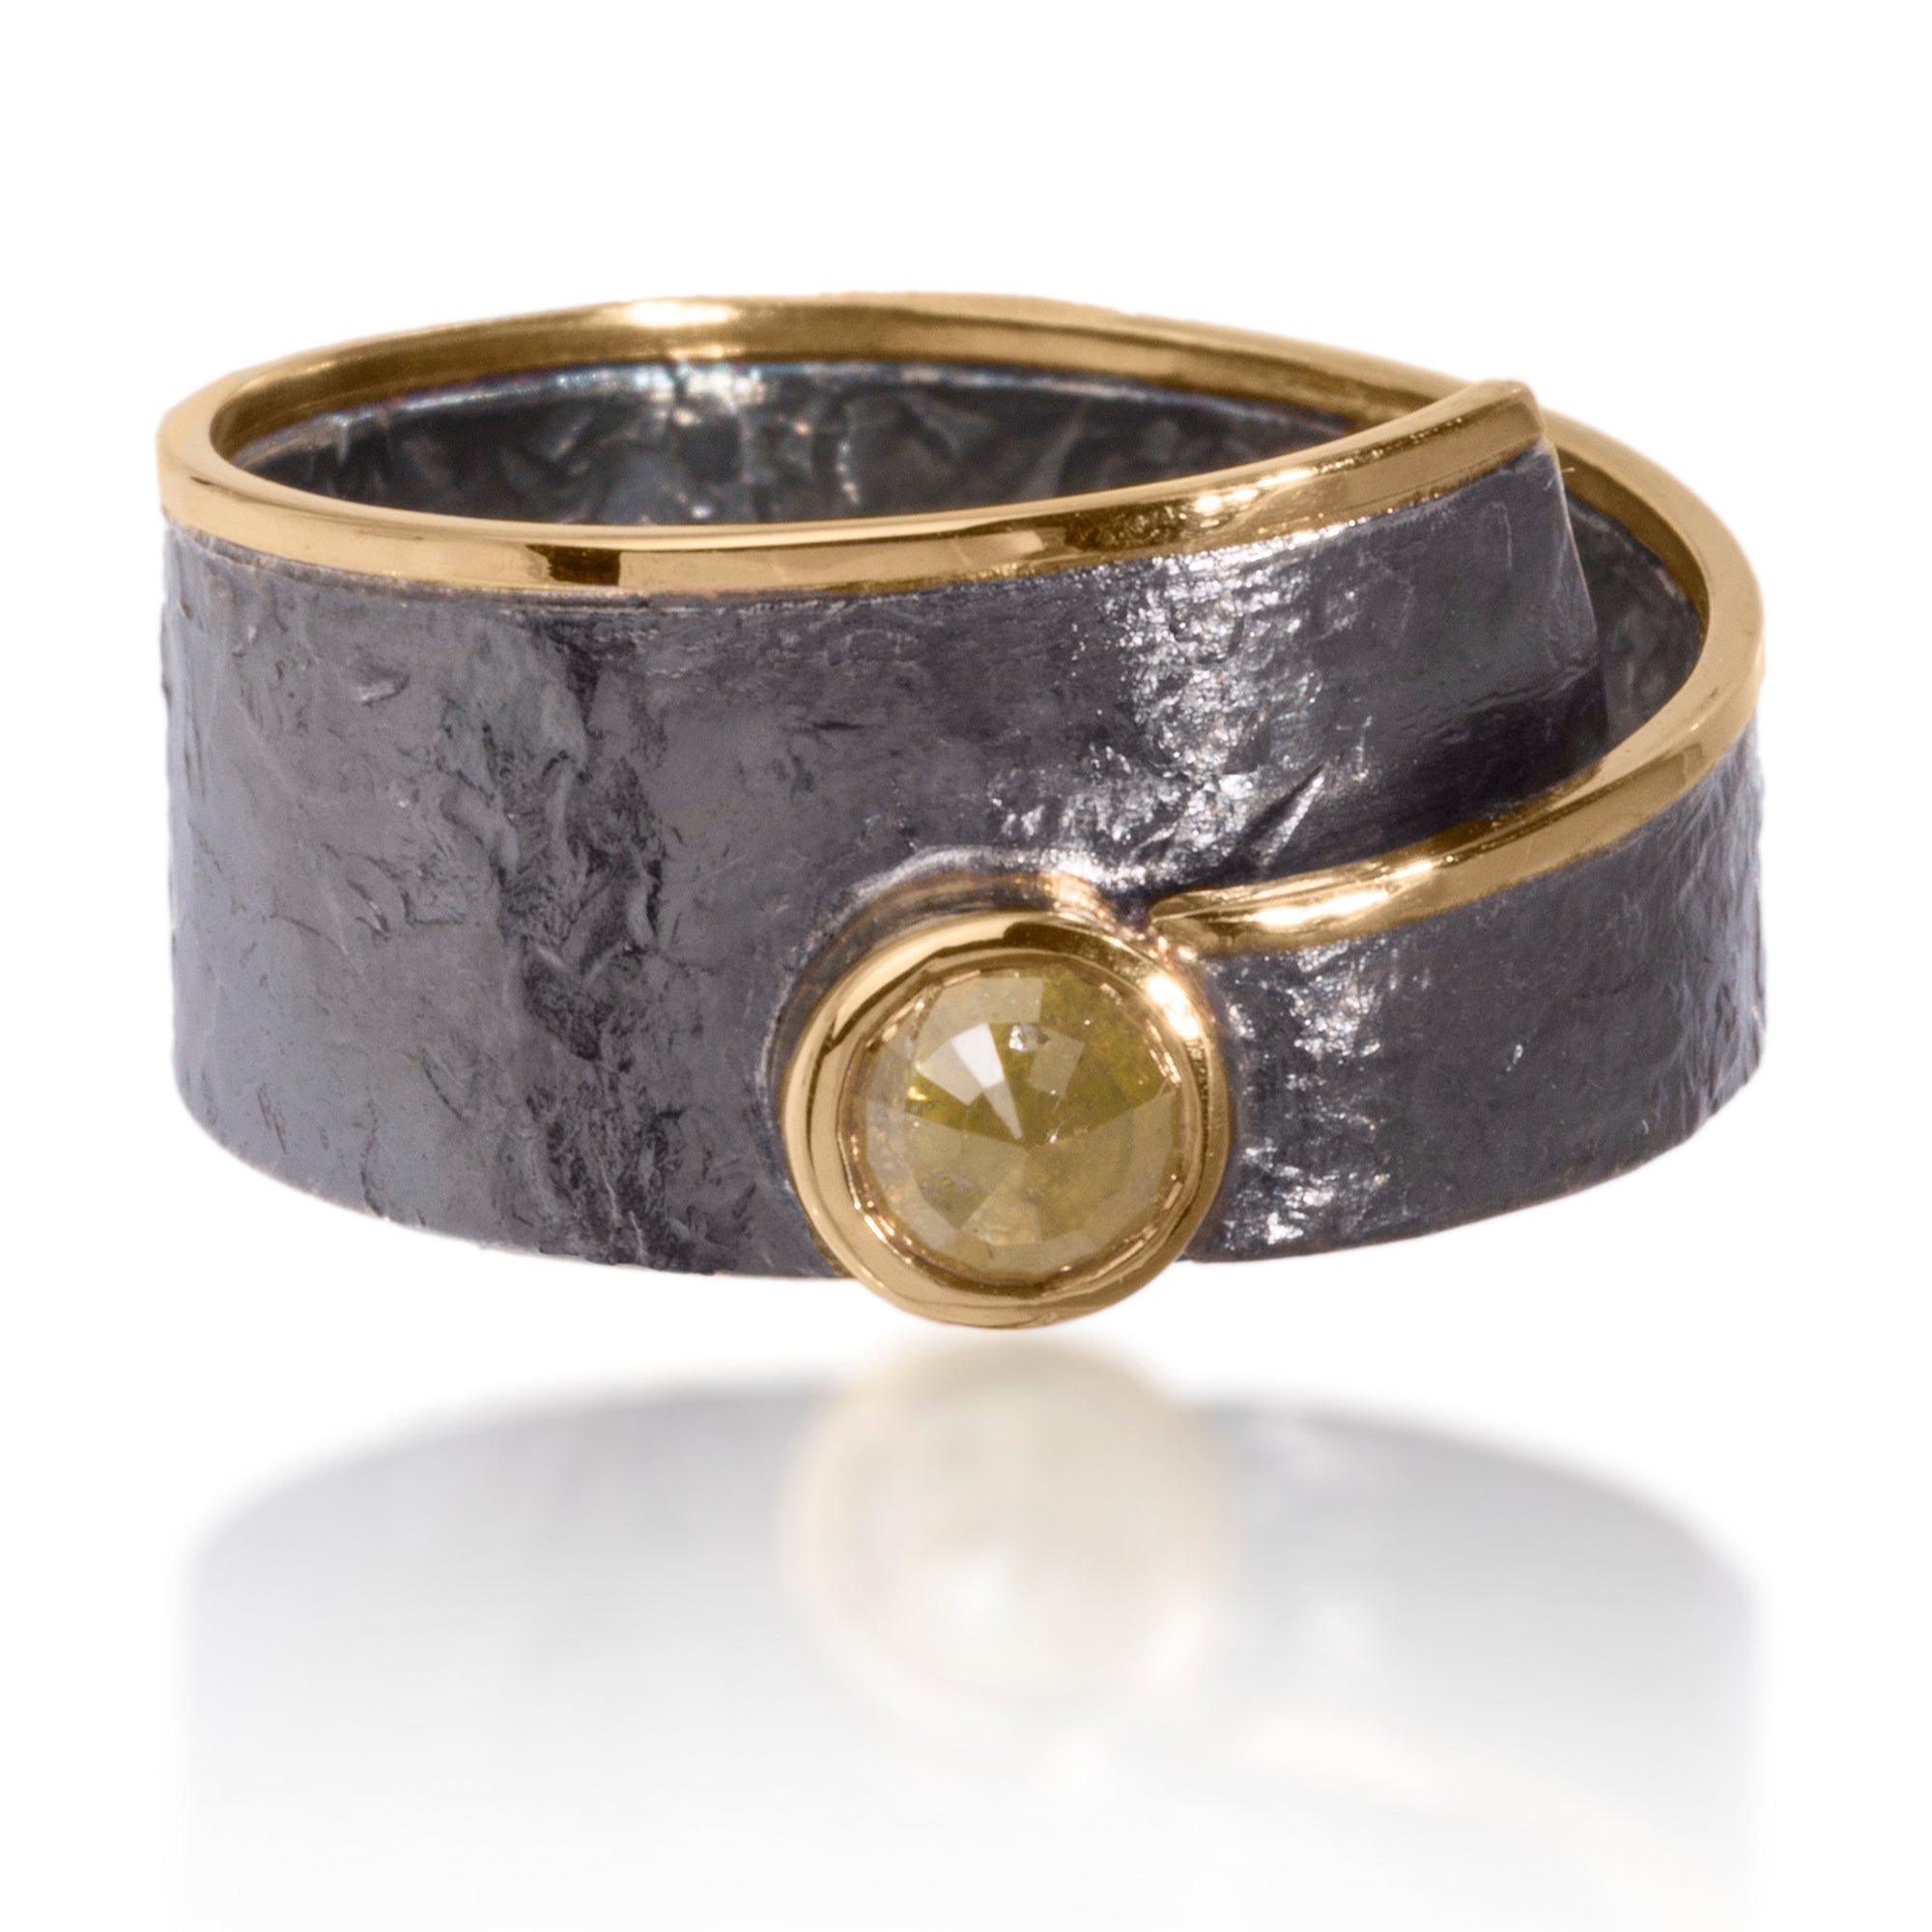 This simple and elegant Cyclone Ring is made of 18k gold and oxidized silver with a bezel set center rose cut, opaque diamond. Hand fabricated, hammer textured. Available in various widths, colors and cuts. 0.28- 0.33 tcw.